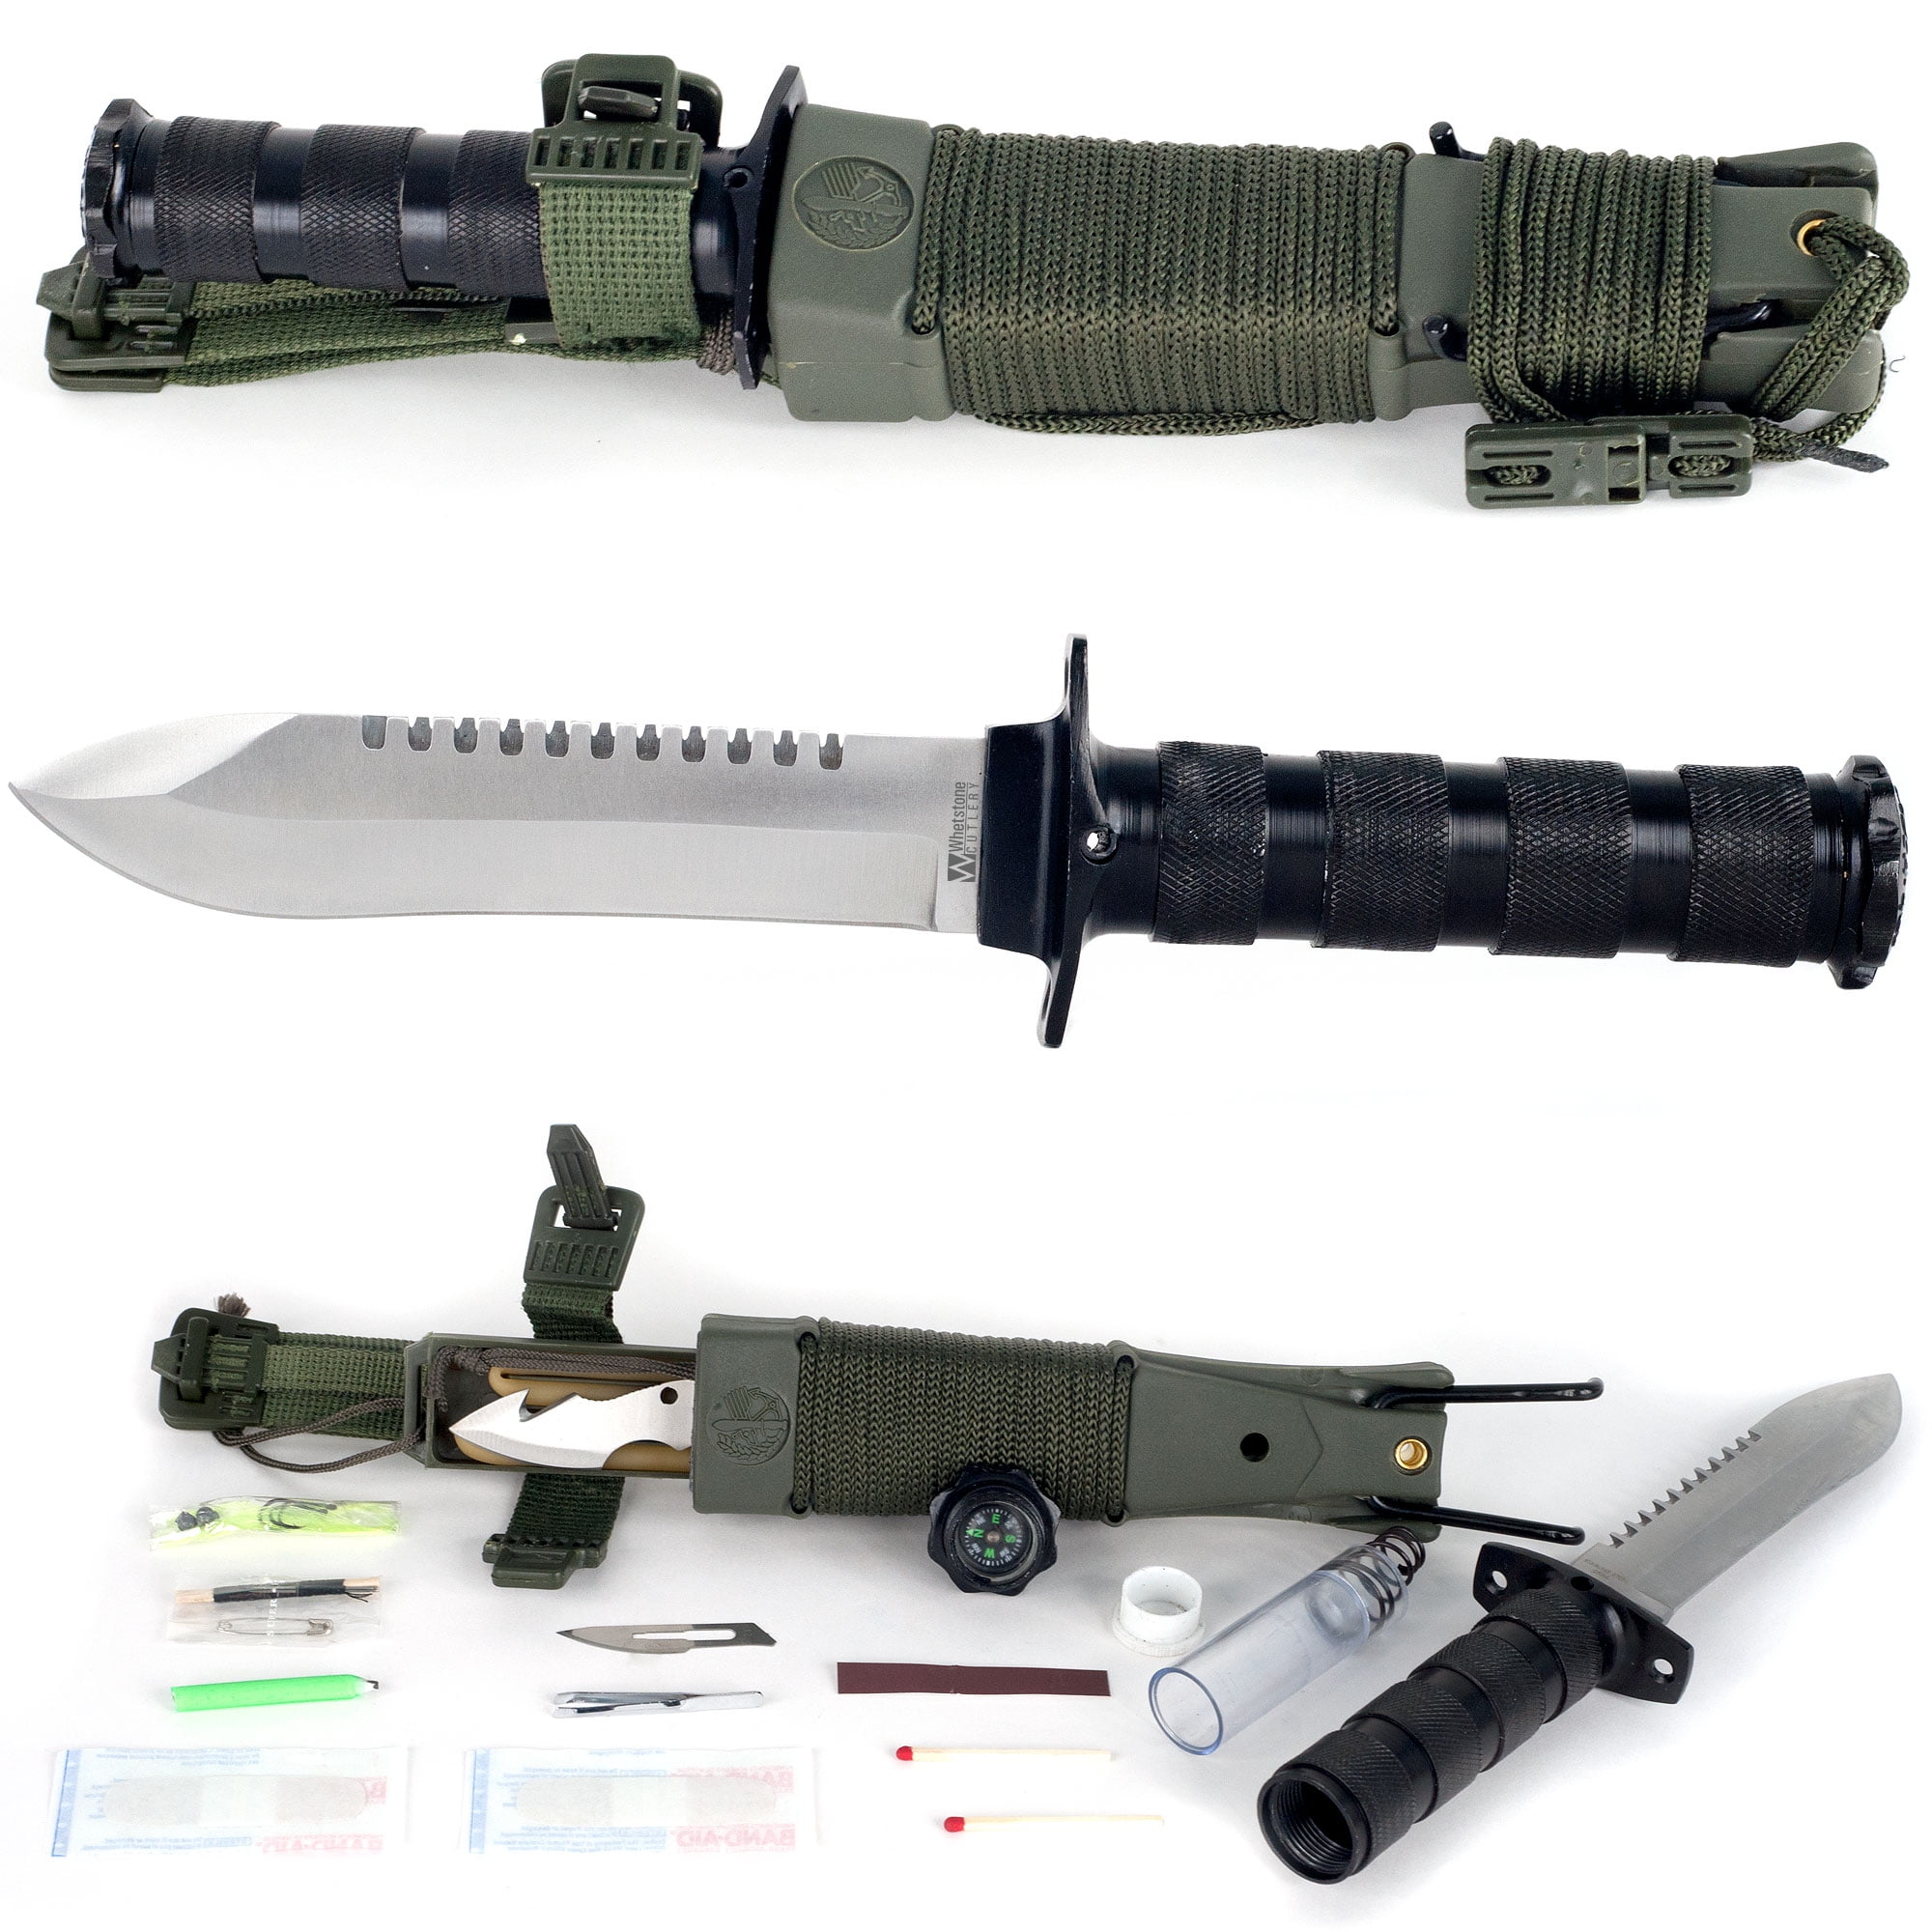 Anchored Eagle Survival Knife with Sheath by Whestone 